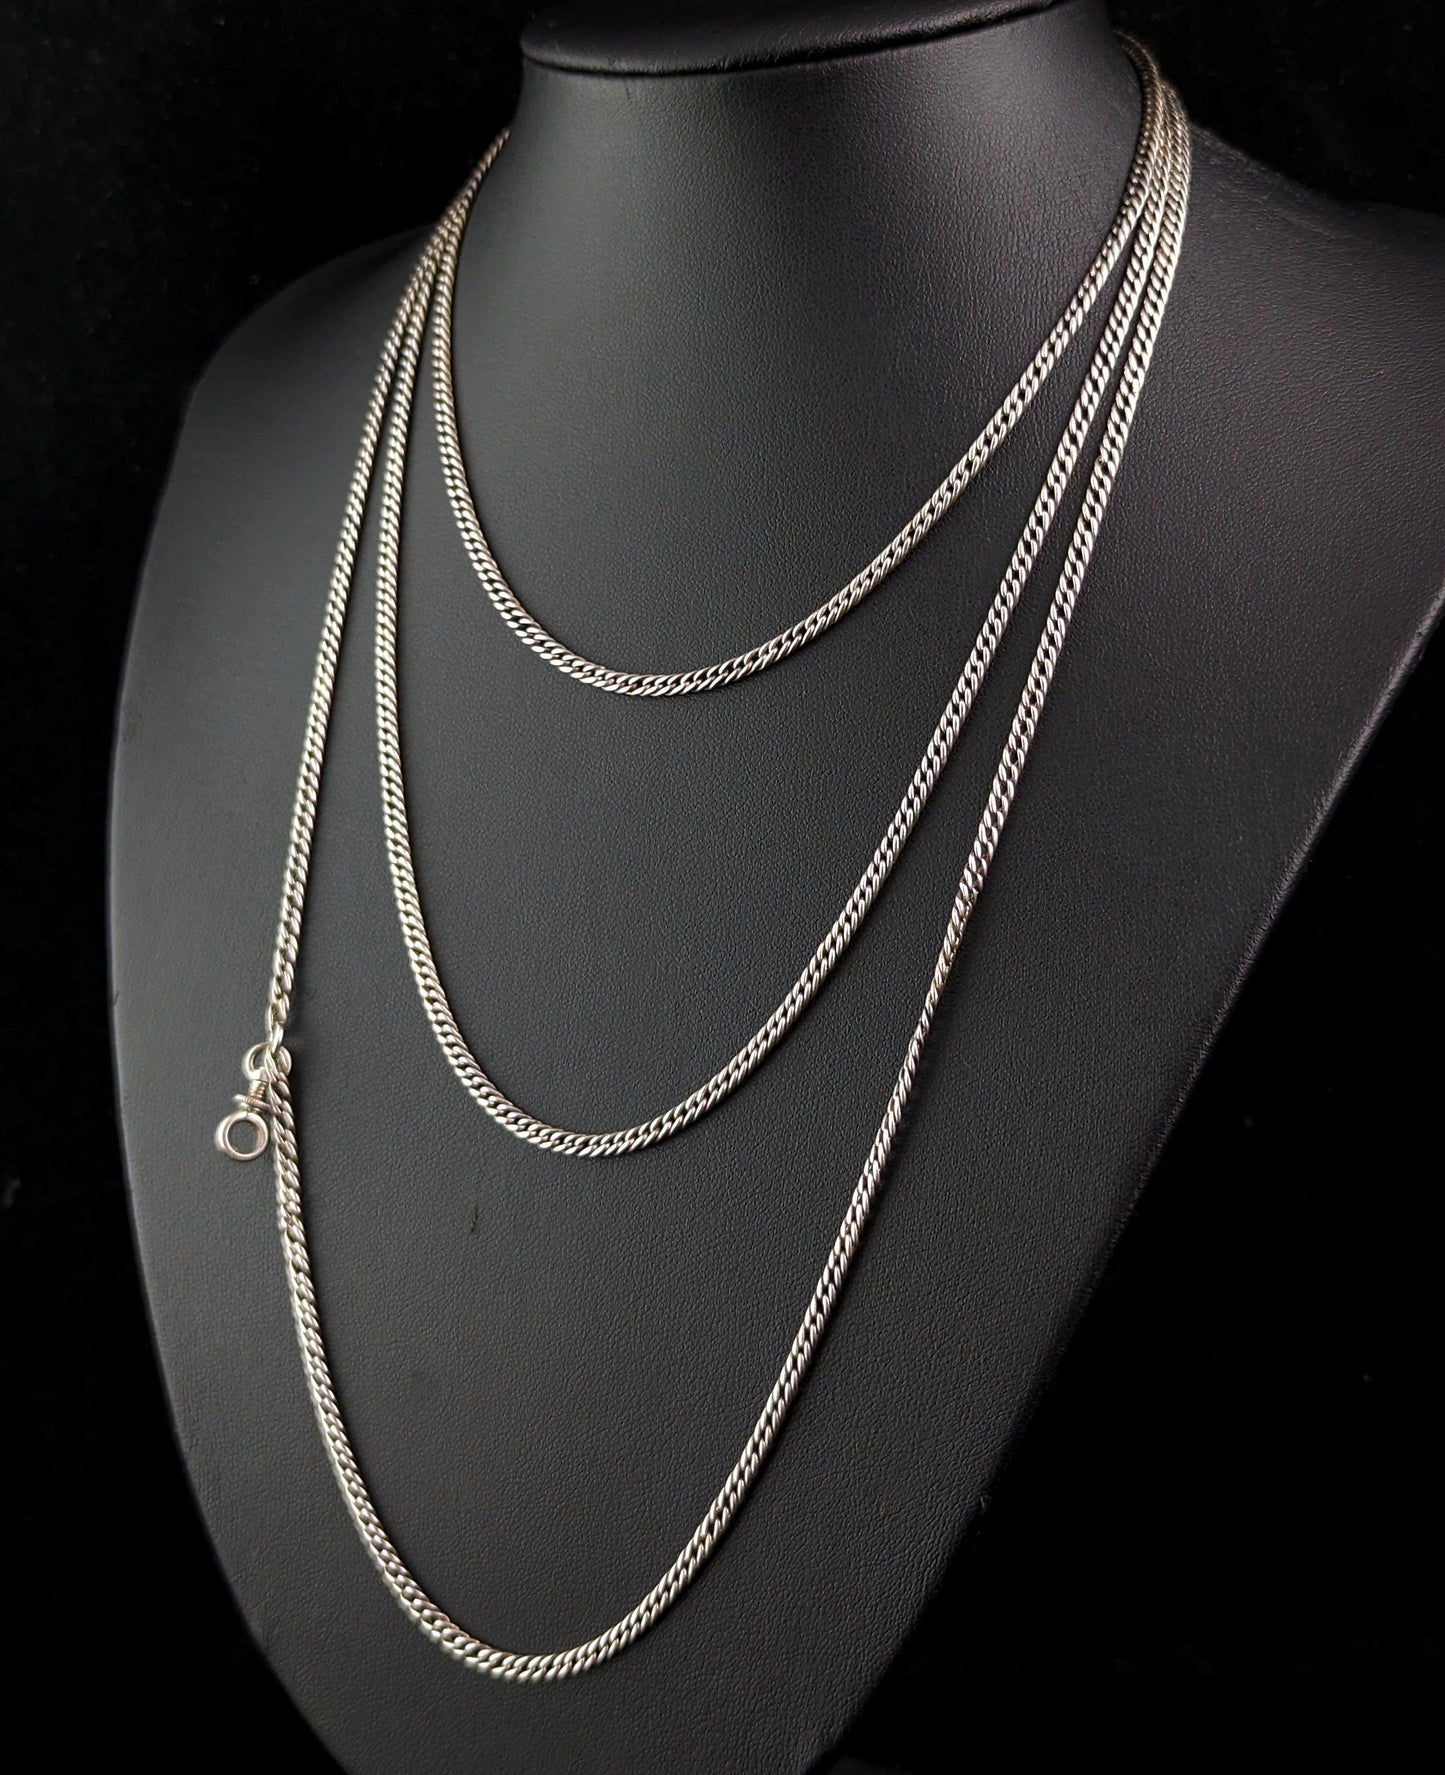 Antique sterling silver long chain necklace, Victorian